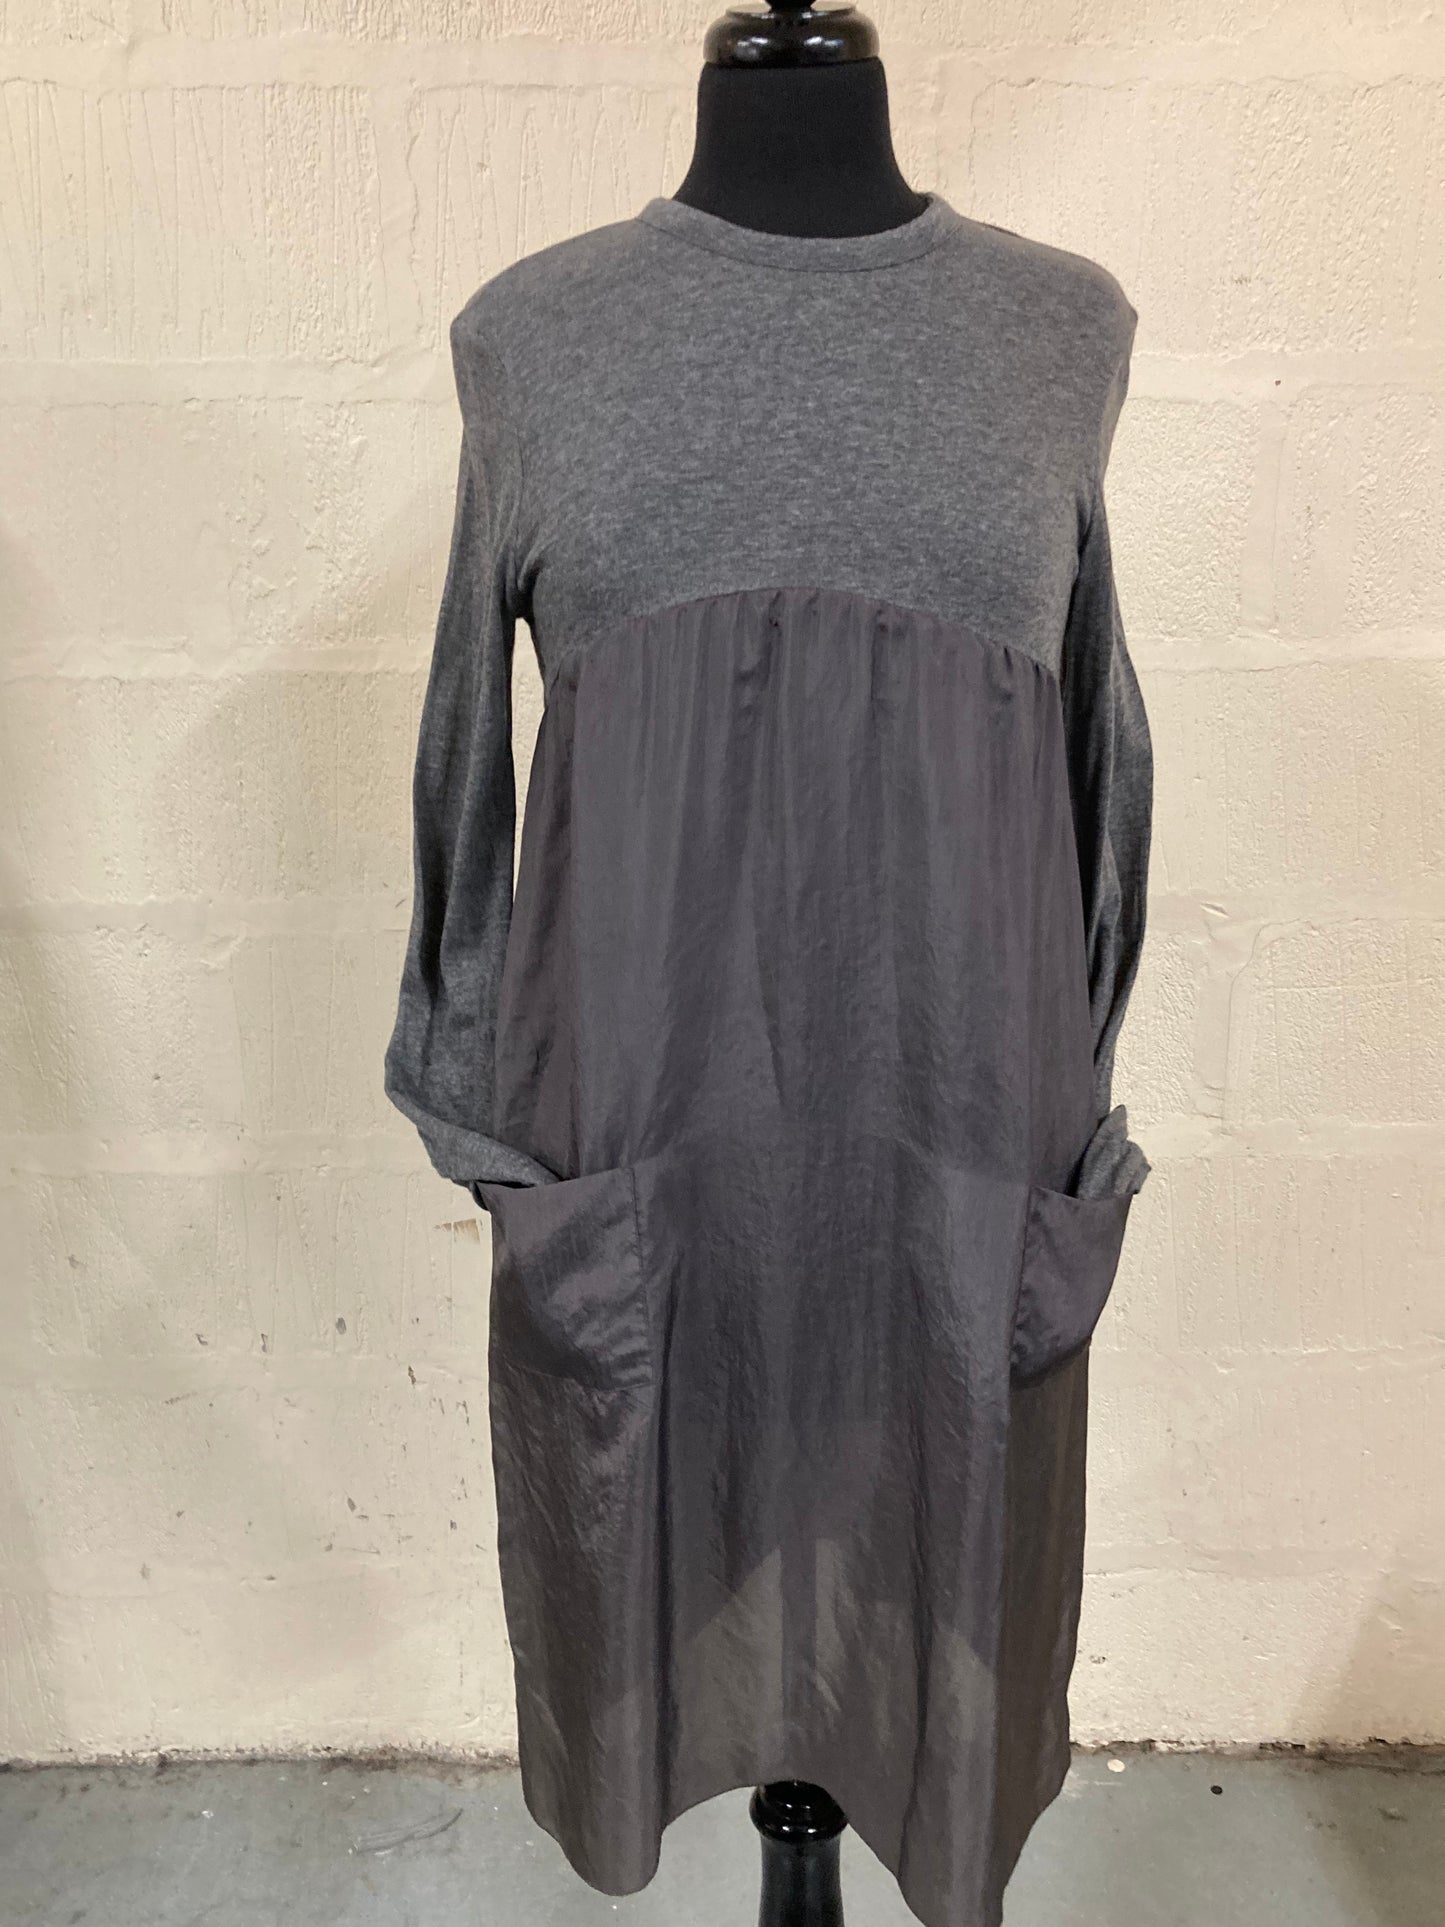 00s MARNI Grey Dress with Pockets and rear Neck Tie Size 8-10